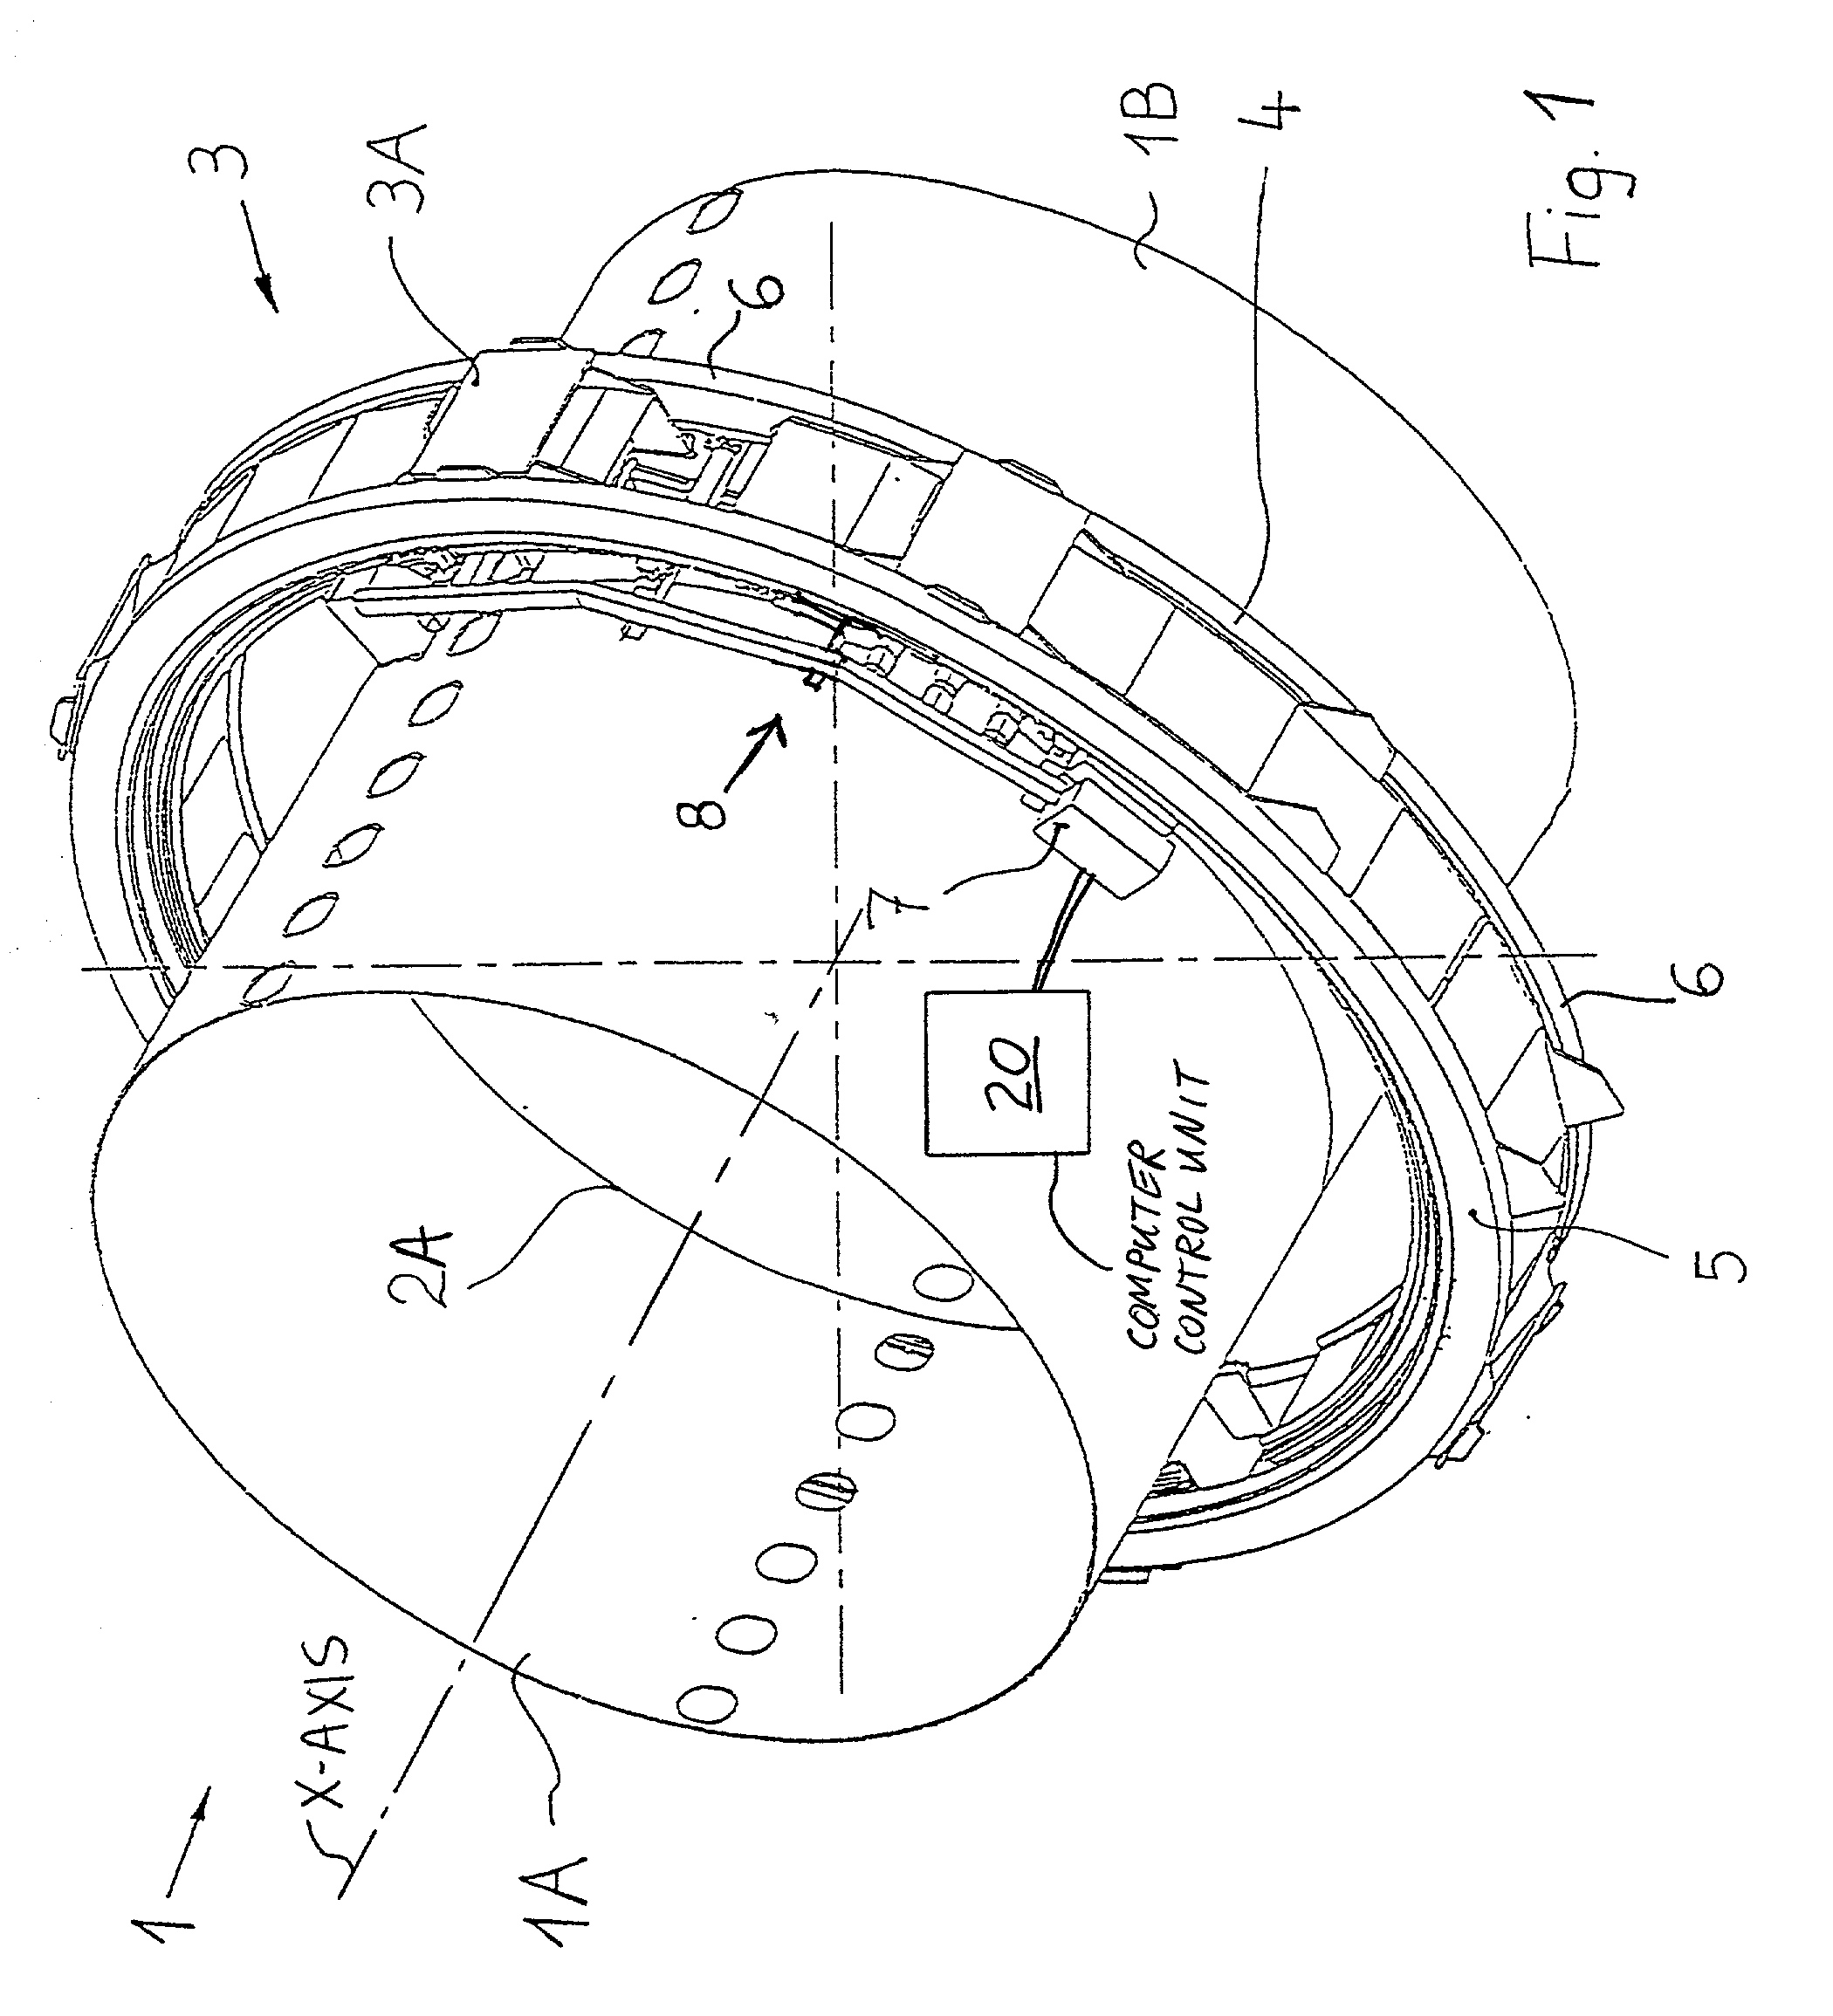 Two-part riveting apparatus and method for riveting barrel-shaped components such as aircraft fuselage components